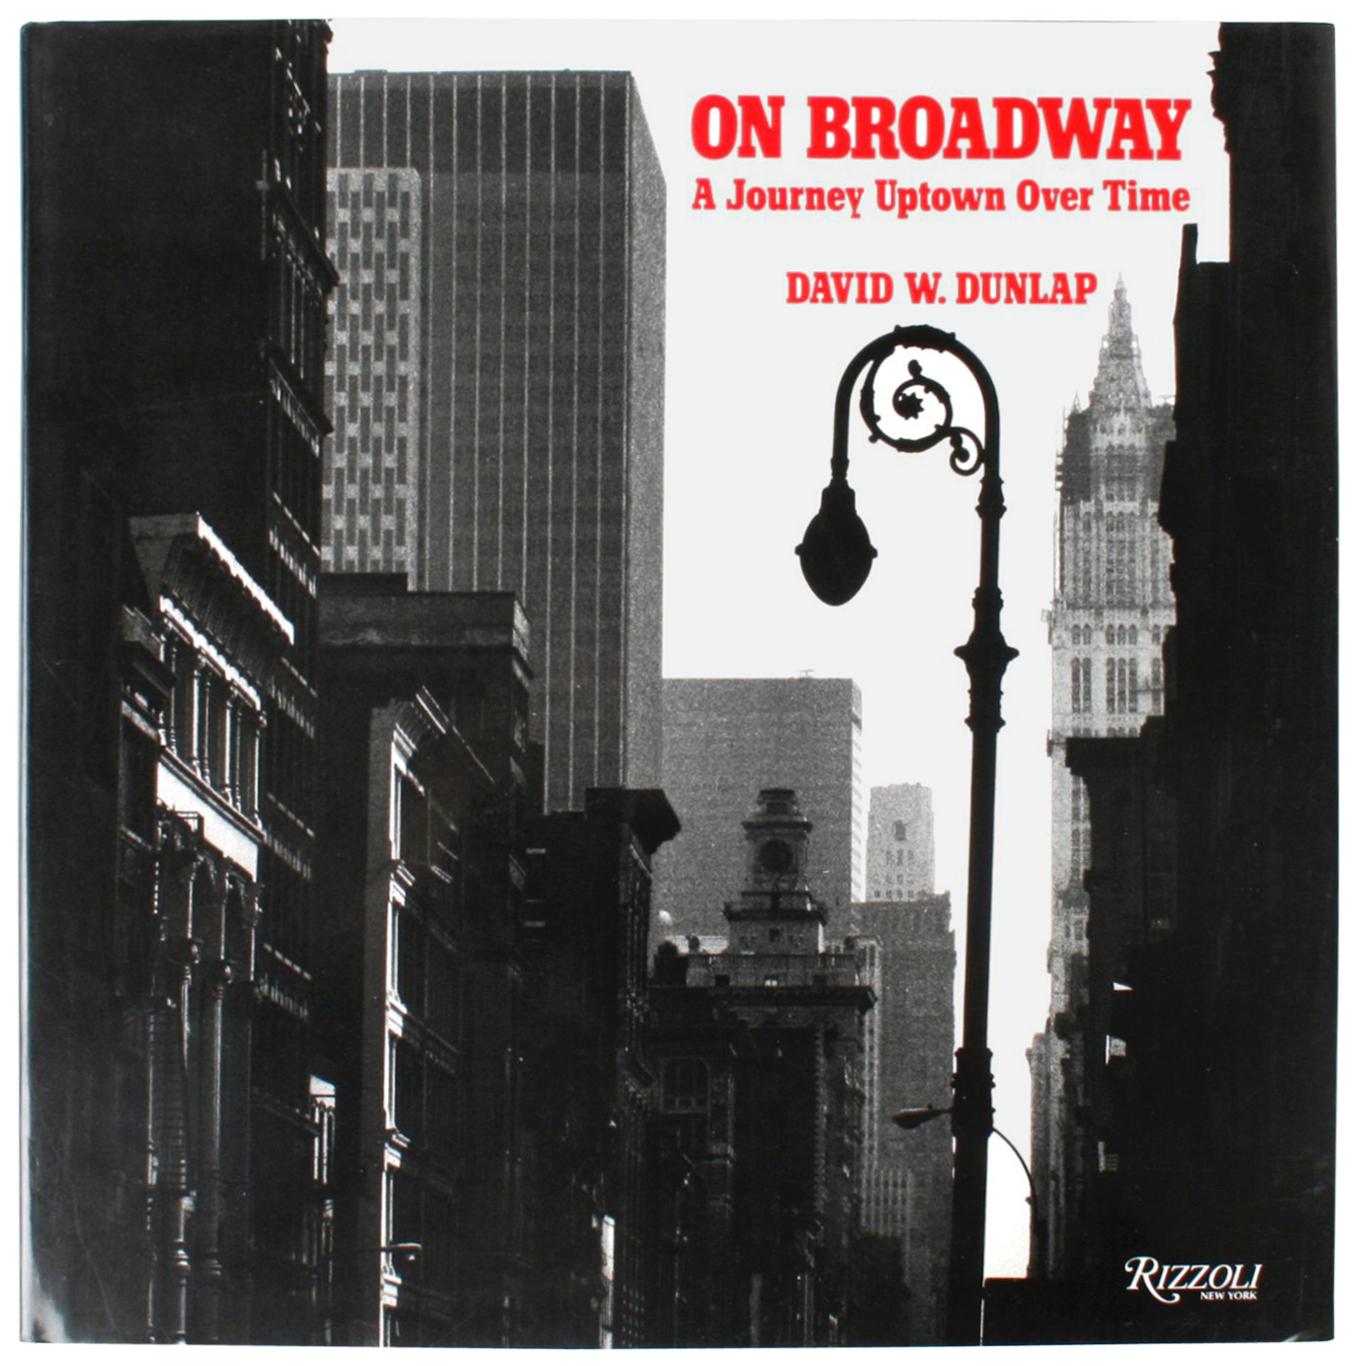 On Broadway by David W. Dunlap, First Edition